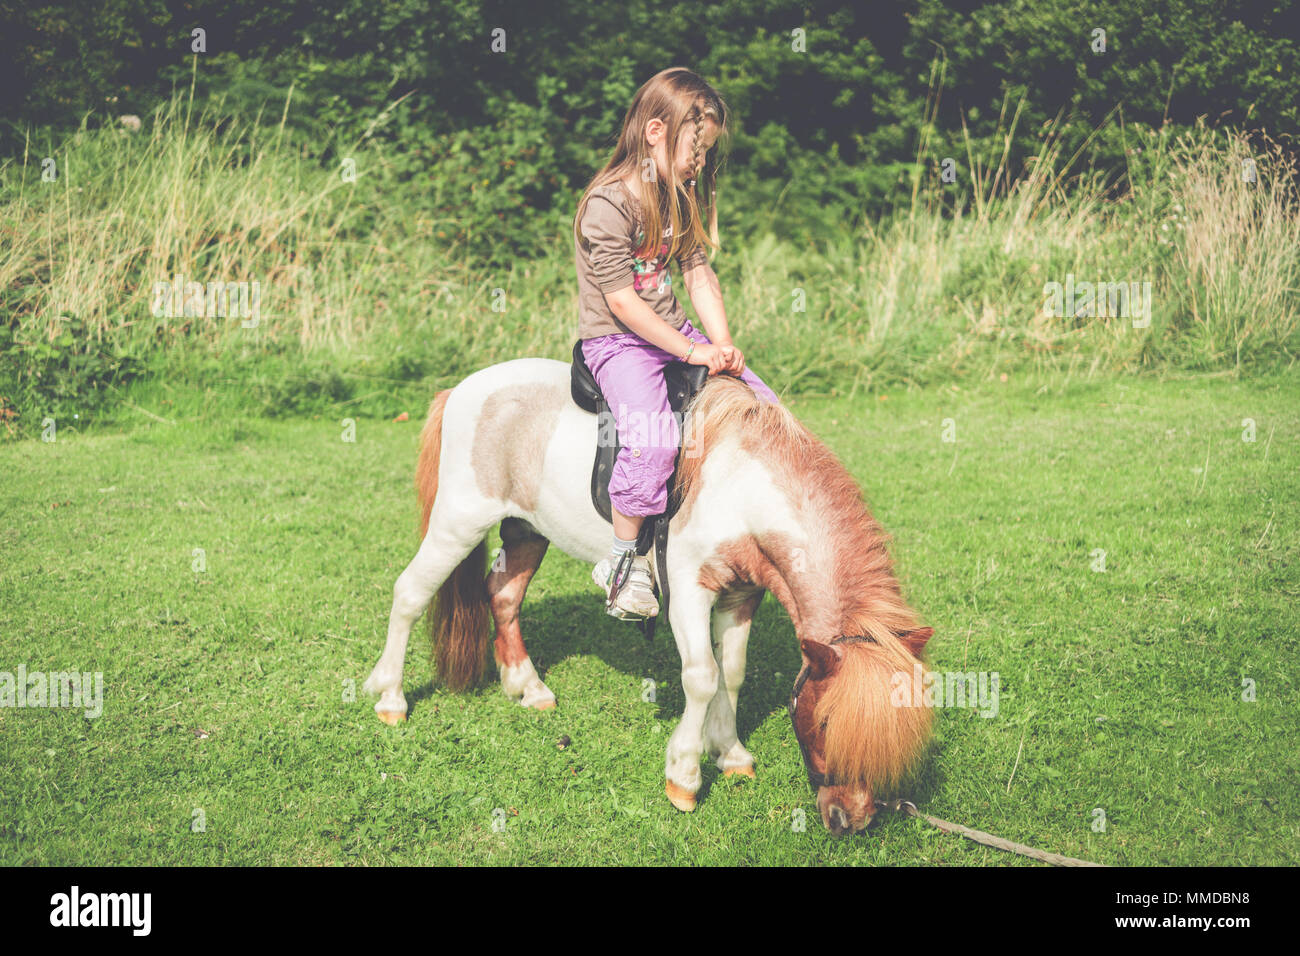 Boho Girl Child Sat Riding on Miniature Horse Grazing in Field Stock Photo